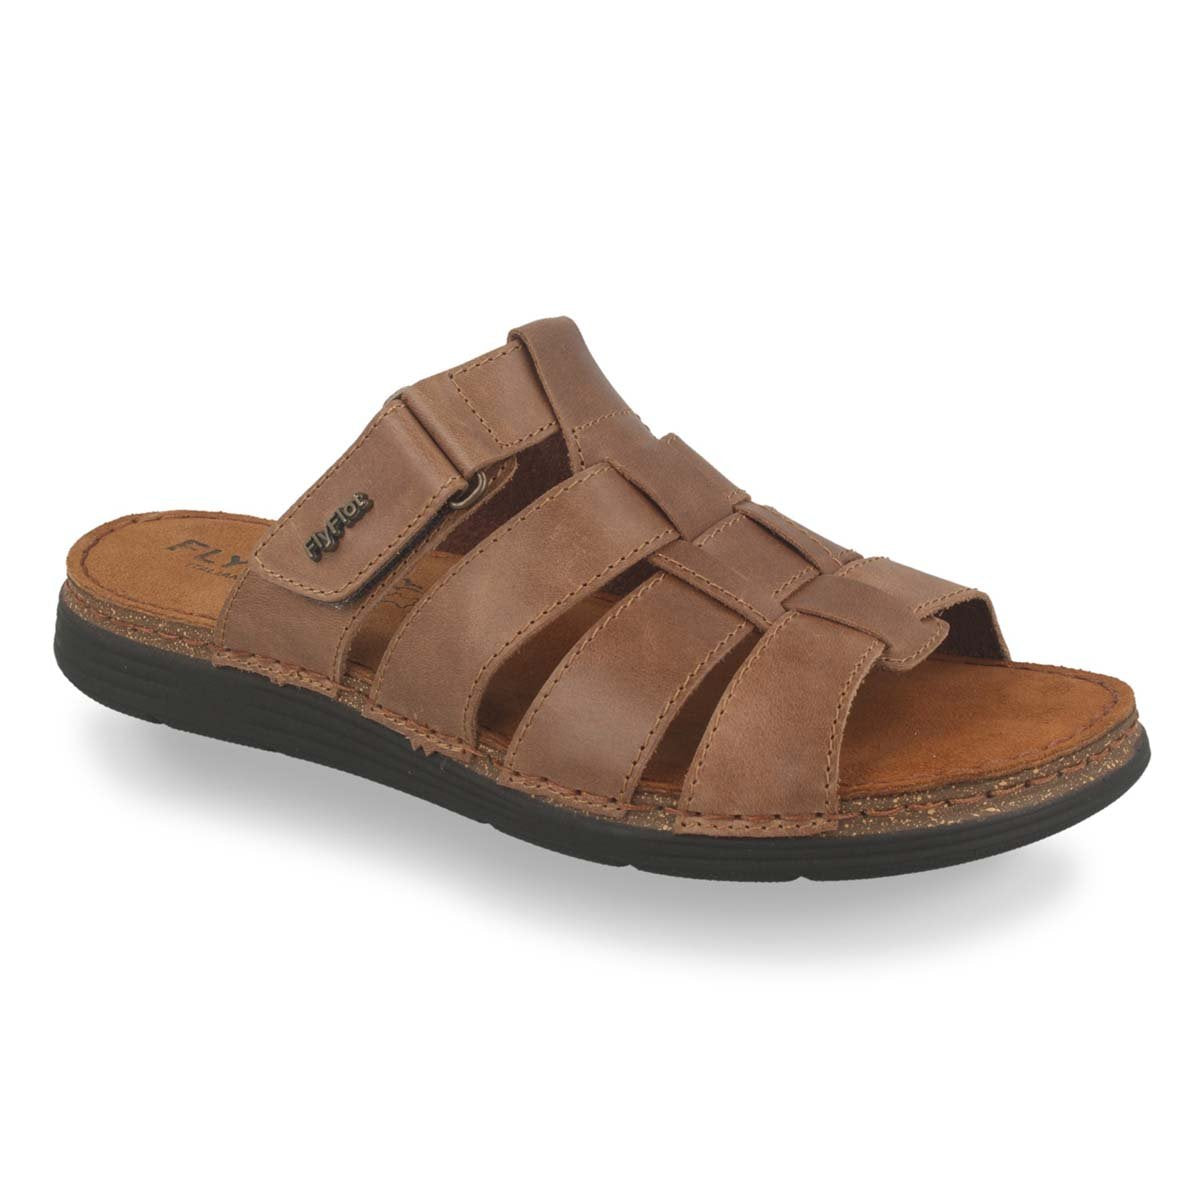 See the Four Leather Strap Velcro Slide Men Sandals in the colour BLACK, available in various sizes